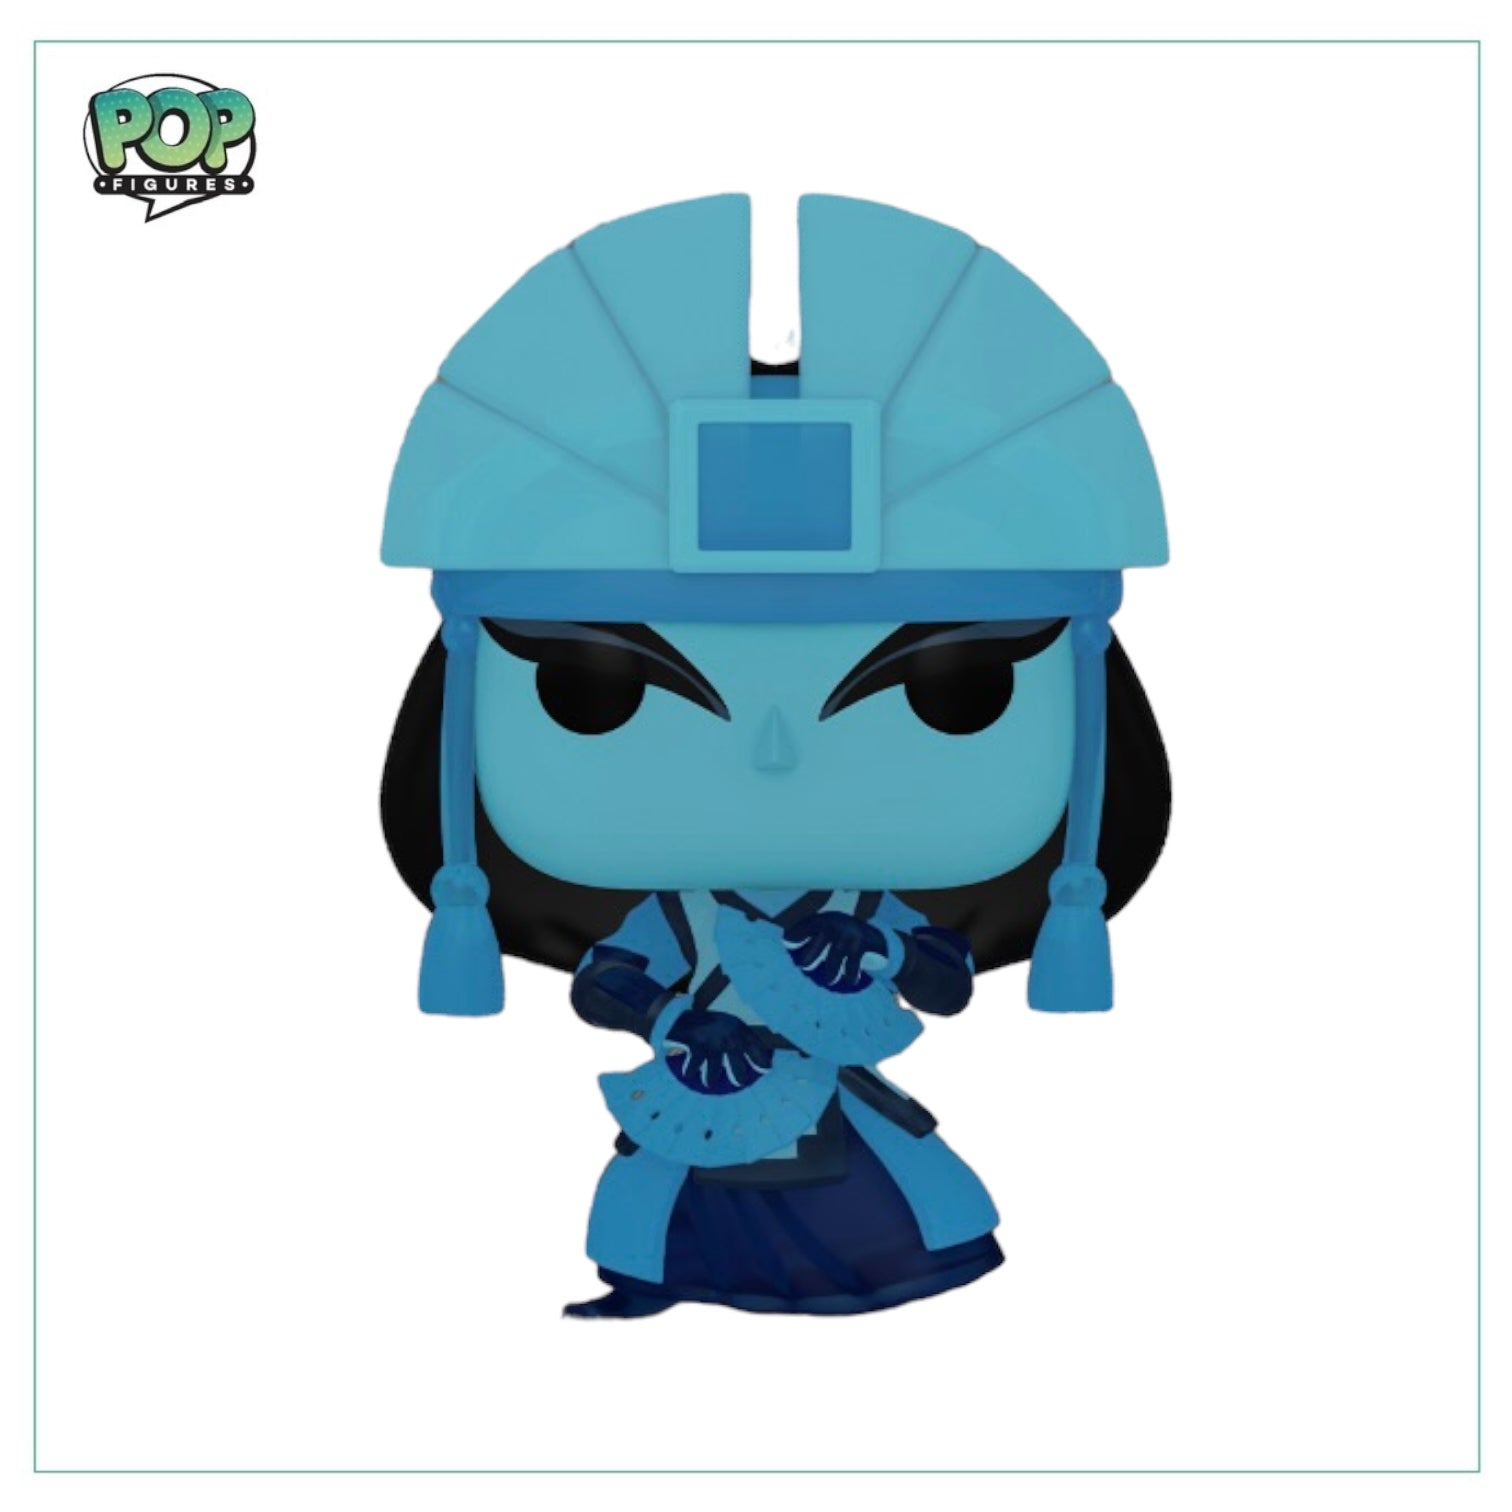 Kyoshi #1489 (Glow in the Dark) Funko Pop! - Avatar the Last Airbender - Entertainment Earth Exclusive